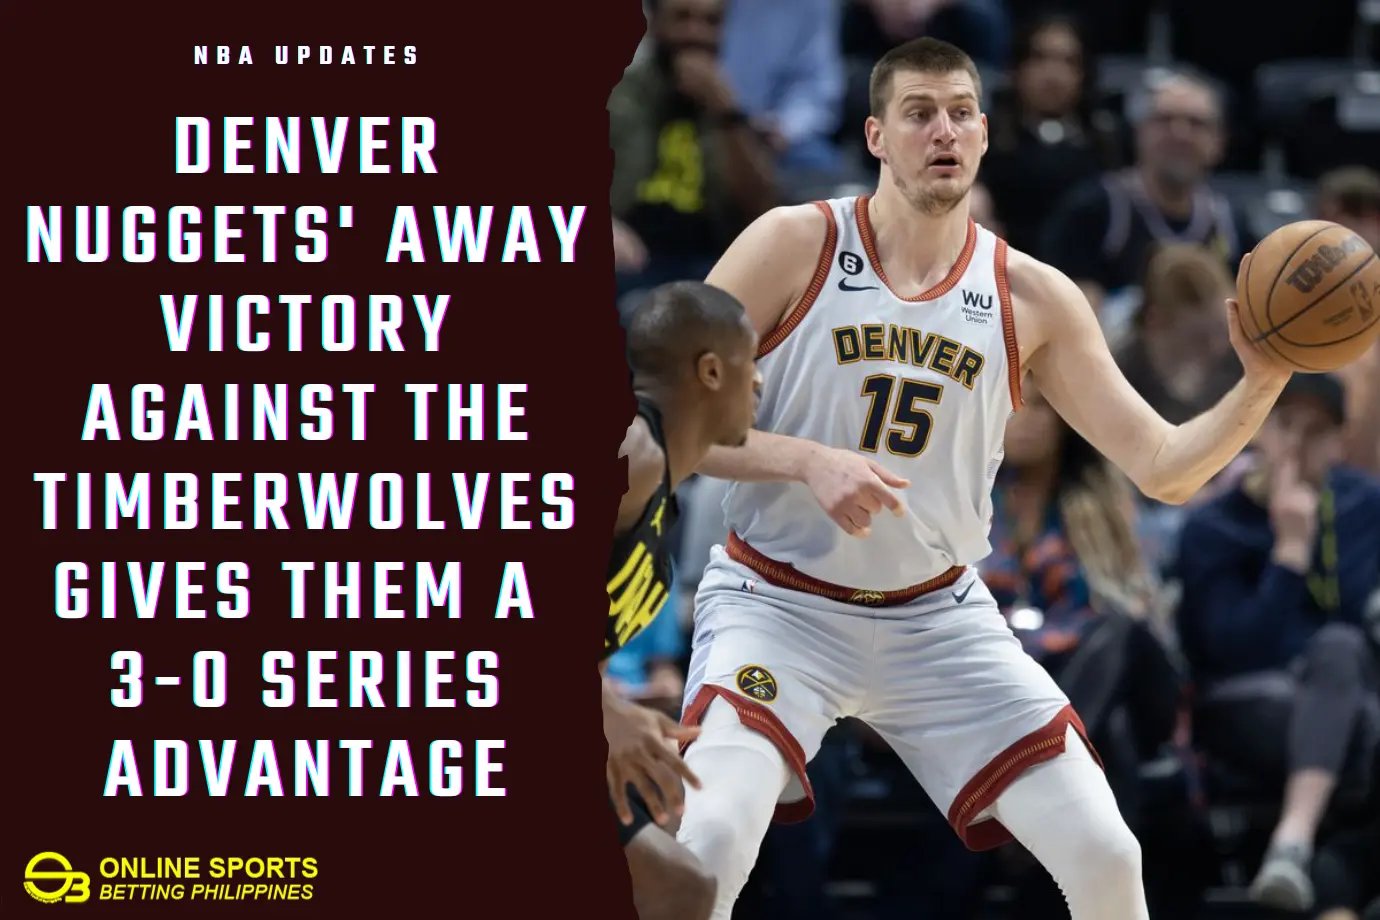 Denver Nuggets' Away Victory Against the Timberwolves Gives them a 3-0 Series Advantage